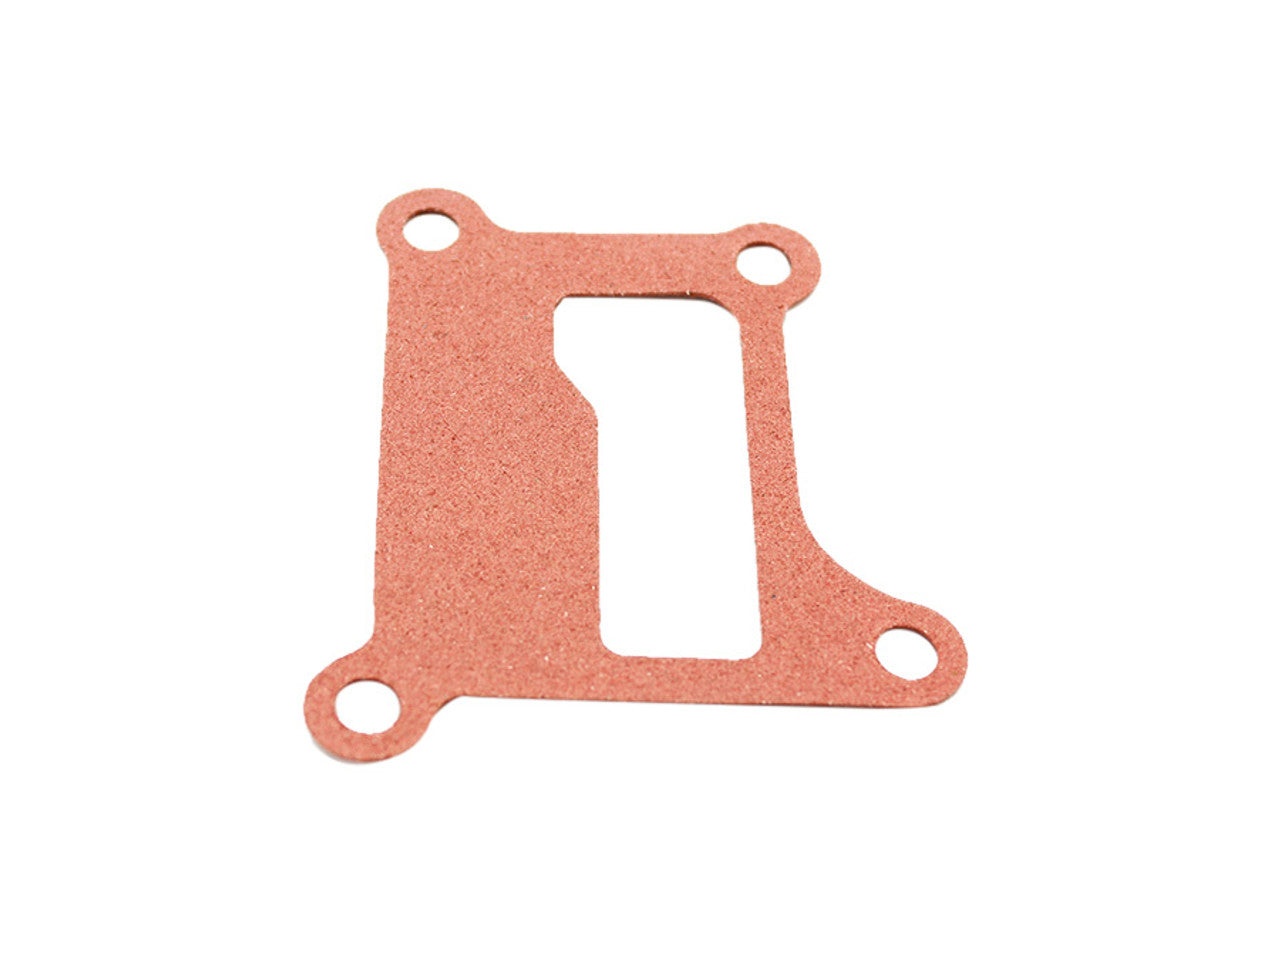 J Replace - OE Replacement Idle Air Control Valve (IACV) Gasket for RWD SR20DET S13 (OE-23785-50F00)